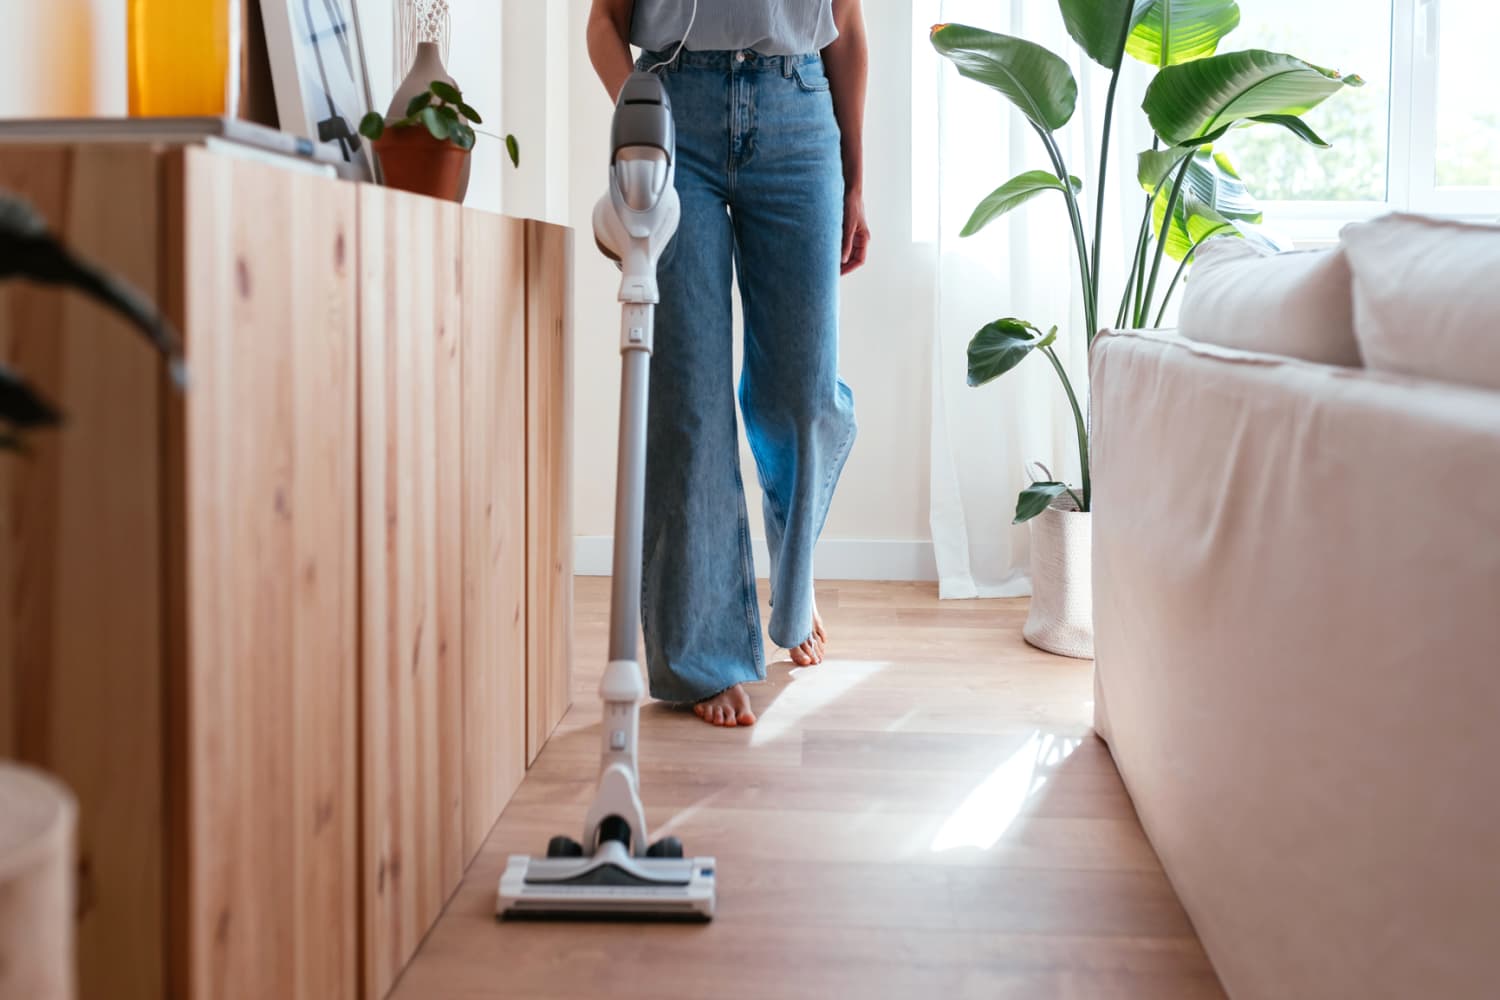 The Best Places to Buy Vacuums for Every Budget